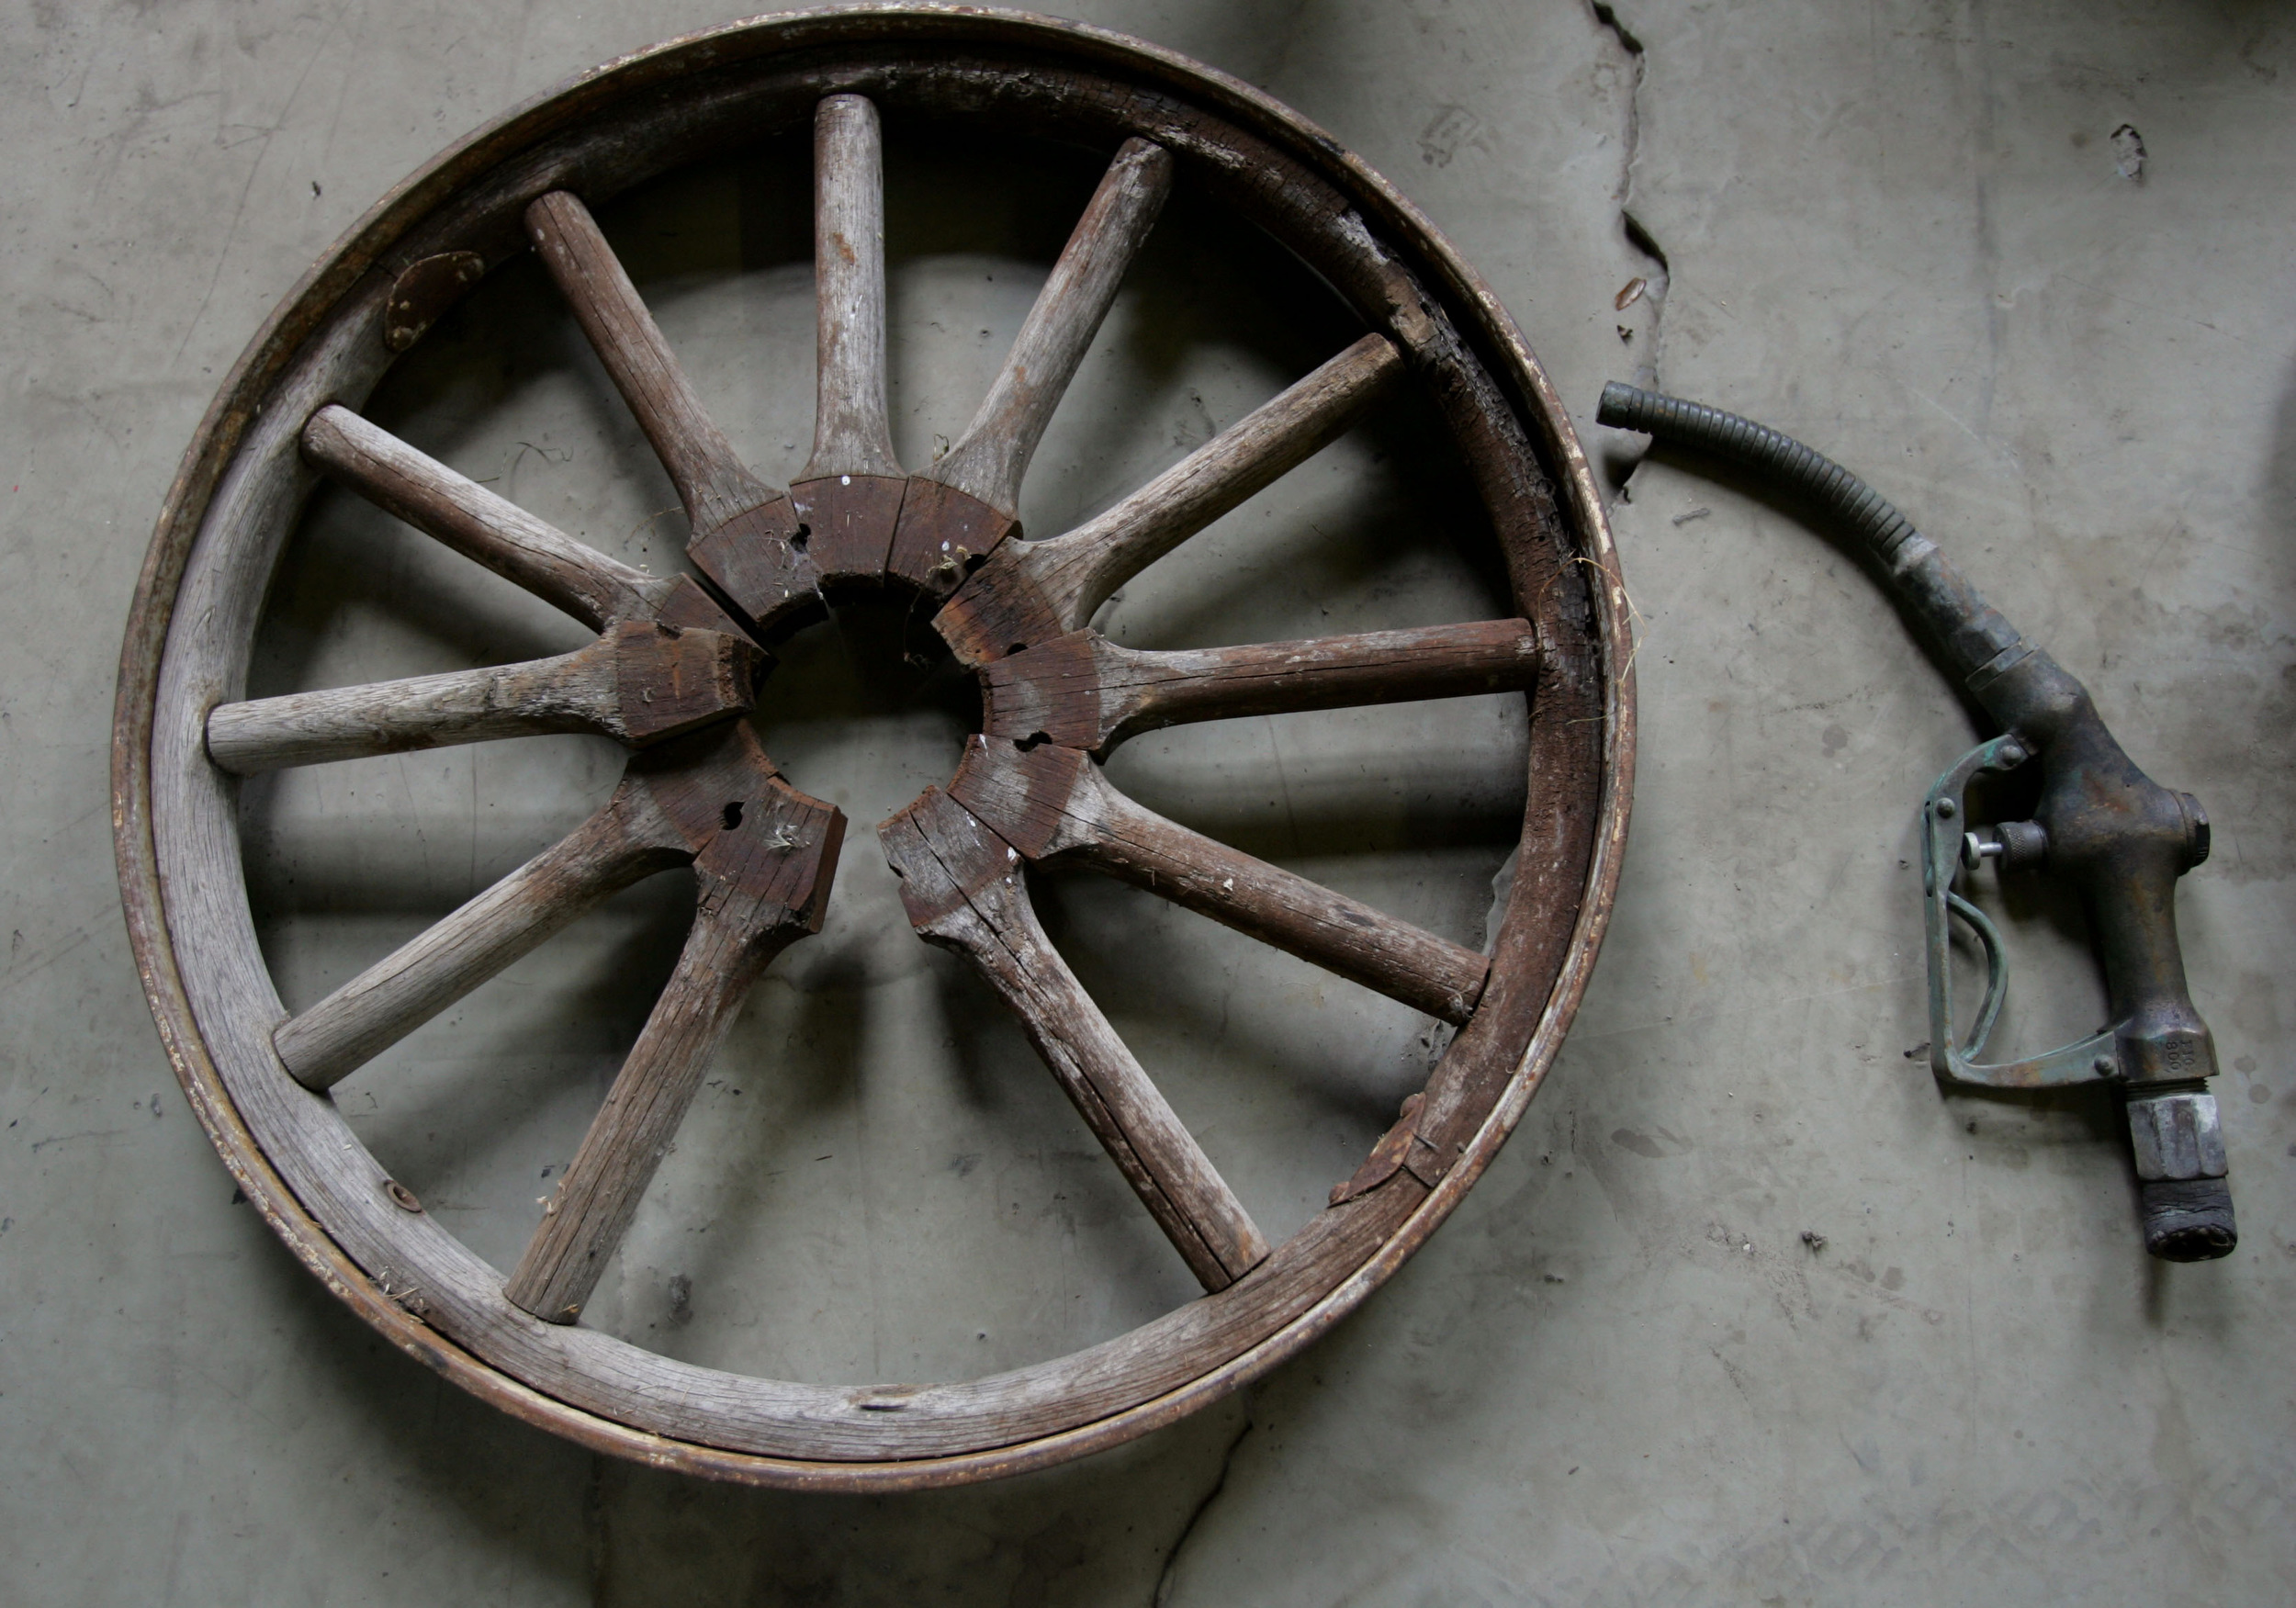  Parts found in a Roseburg, Oregon barn with a 1909/10 Marathon automobile. The short-lived Marathon Motor Works in Nashville, Tenn. was the only known early automaker in the South.    